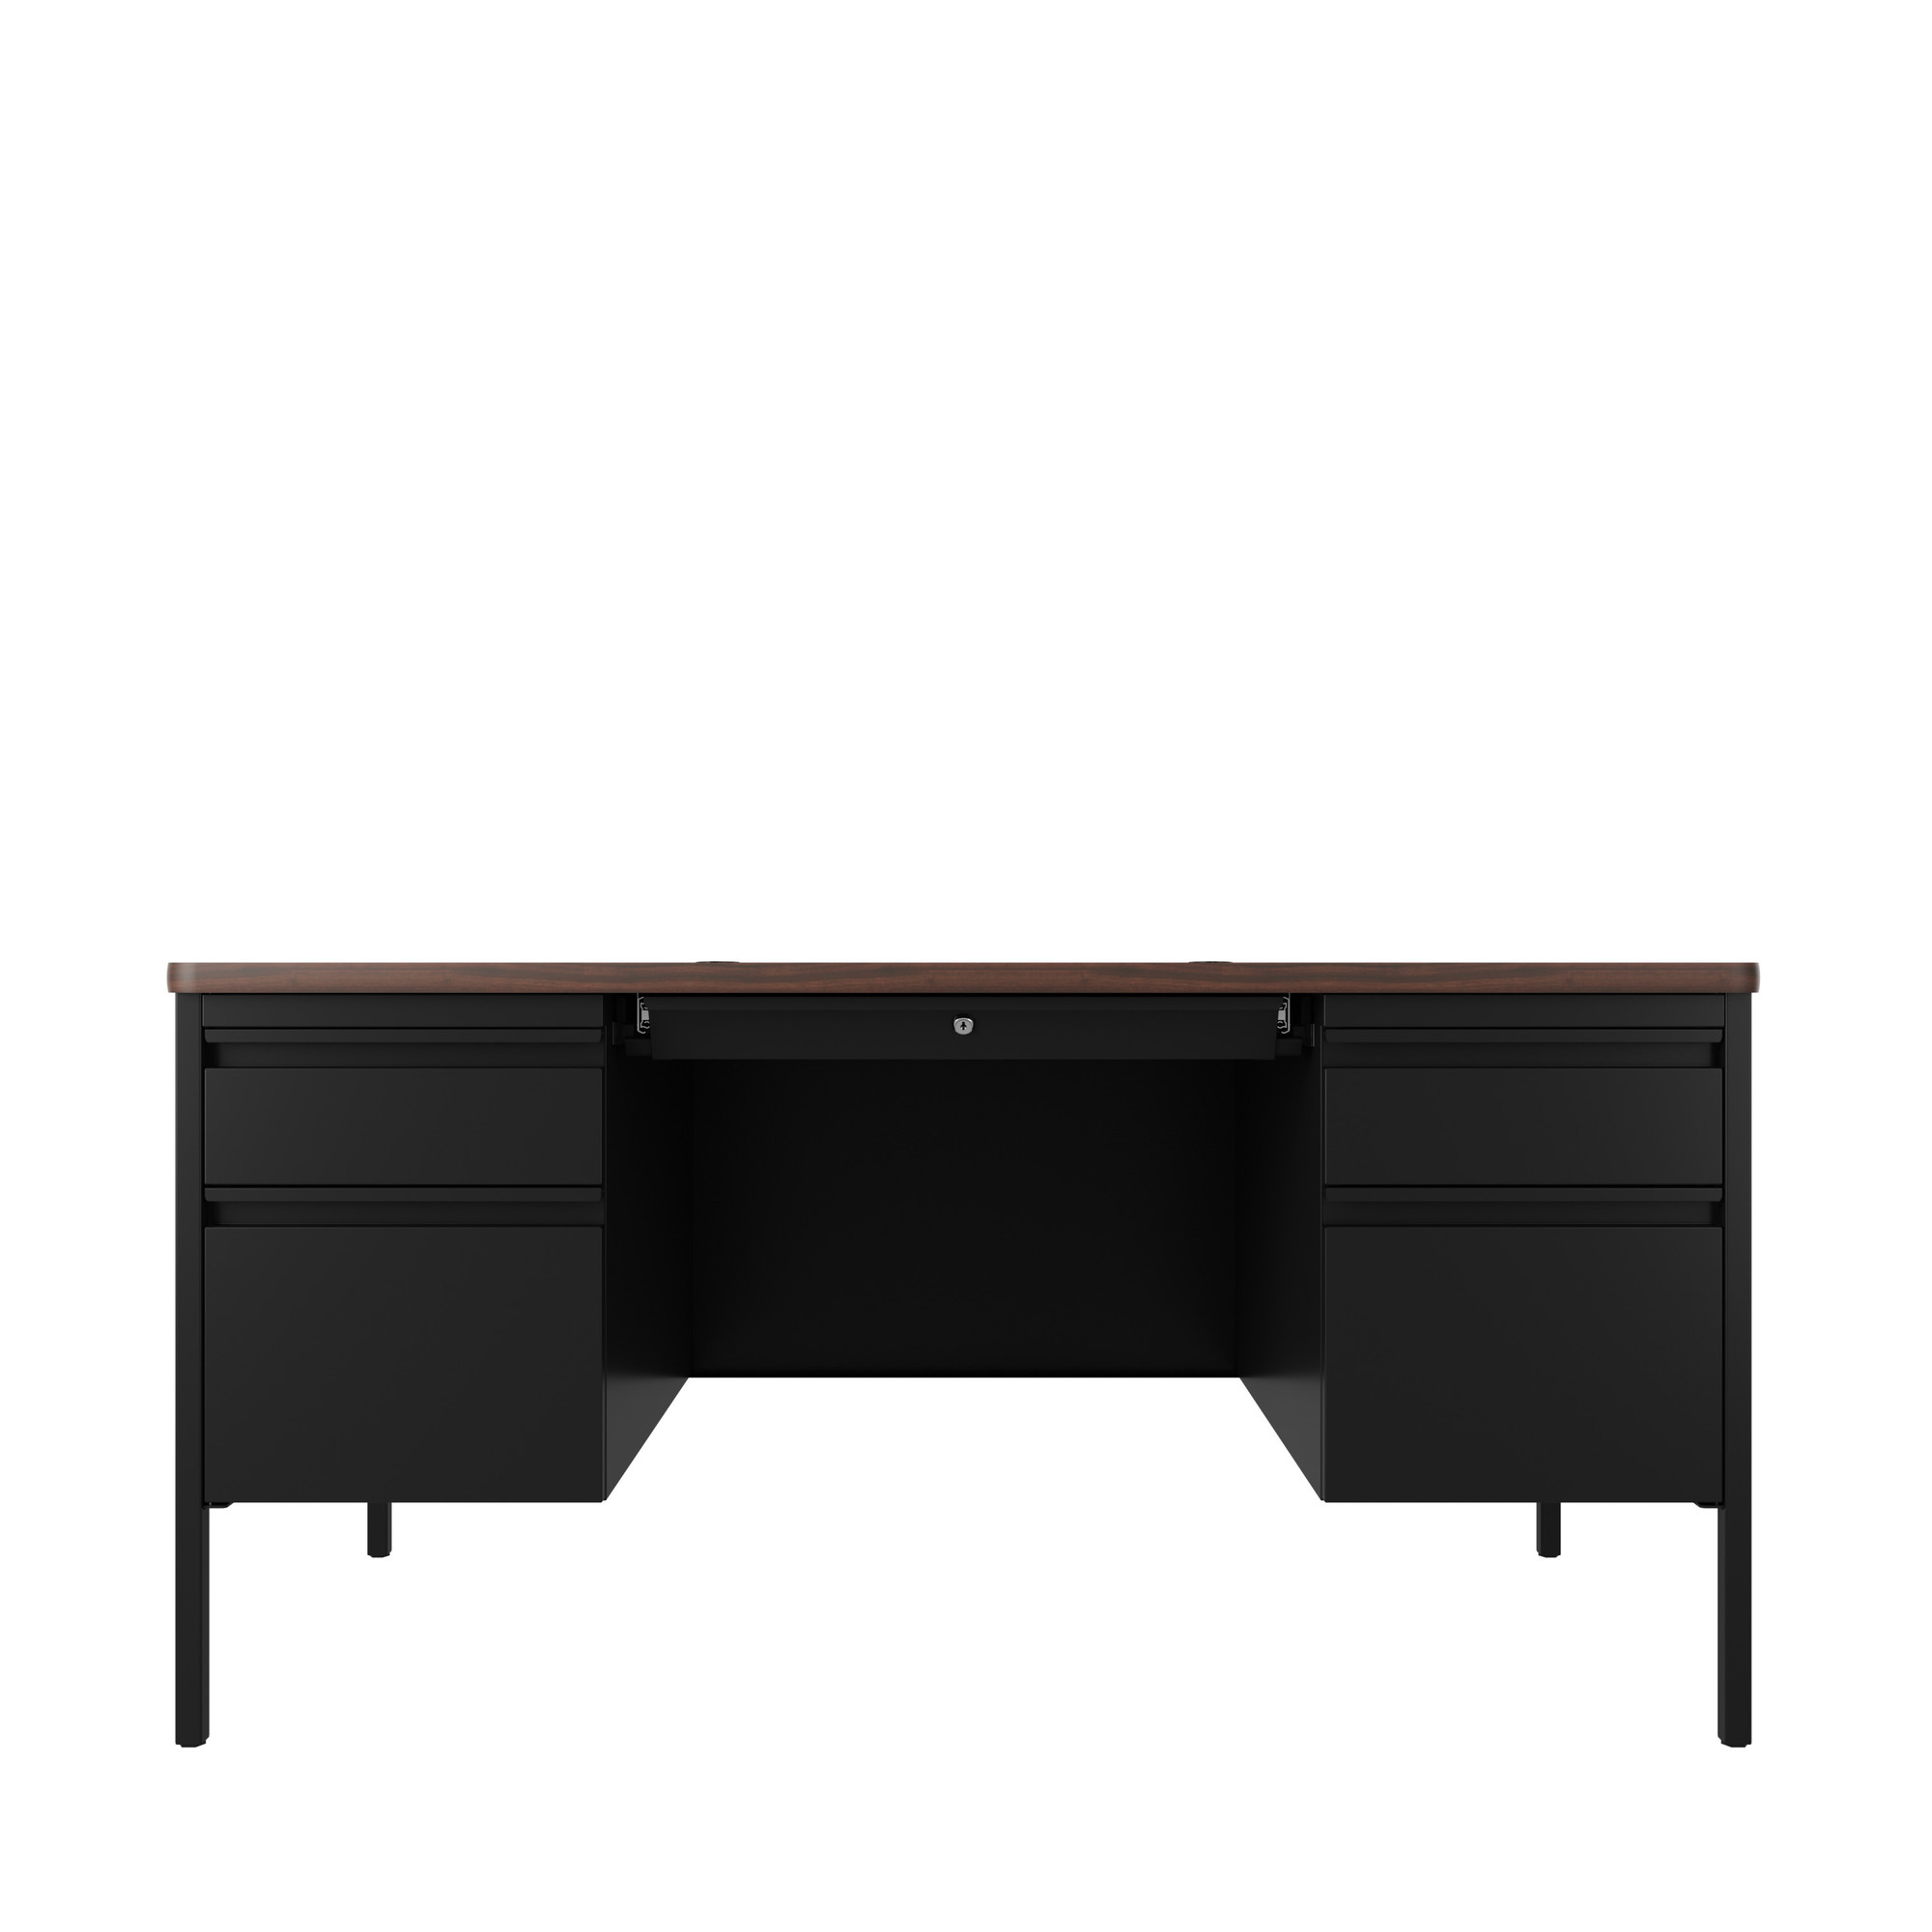 Hirsh Industries, Double Ped File Desk w/ Rounded Corner T-Mold Top, Width 60 in, Height 29.5 in, Depth 30 in, Model 22654